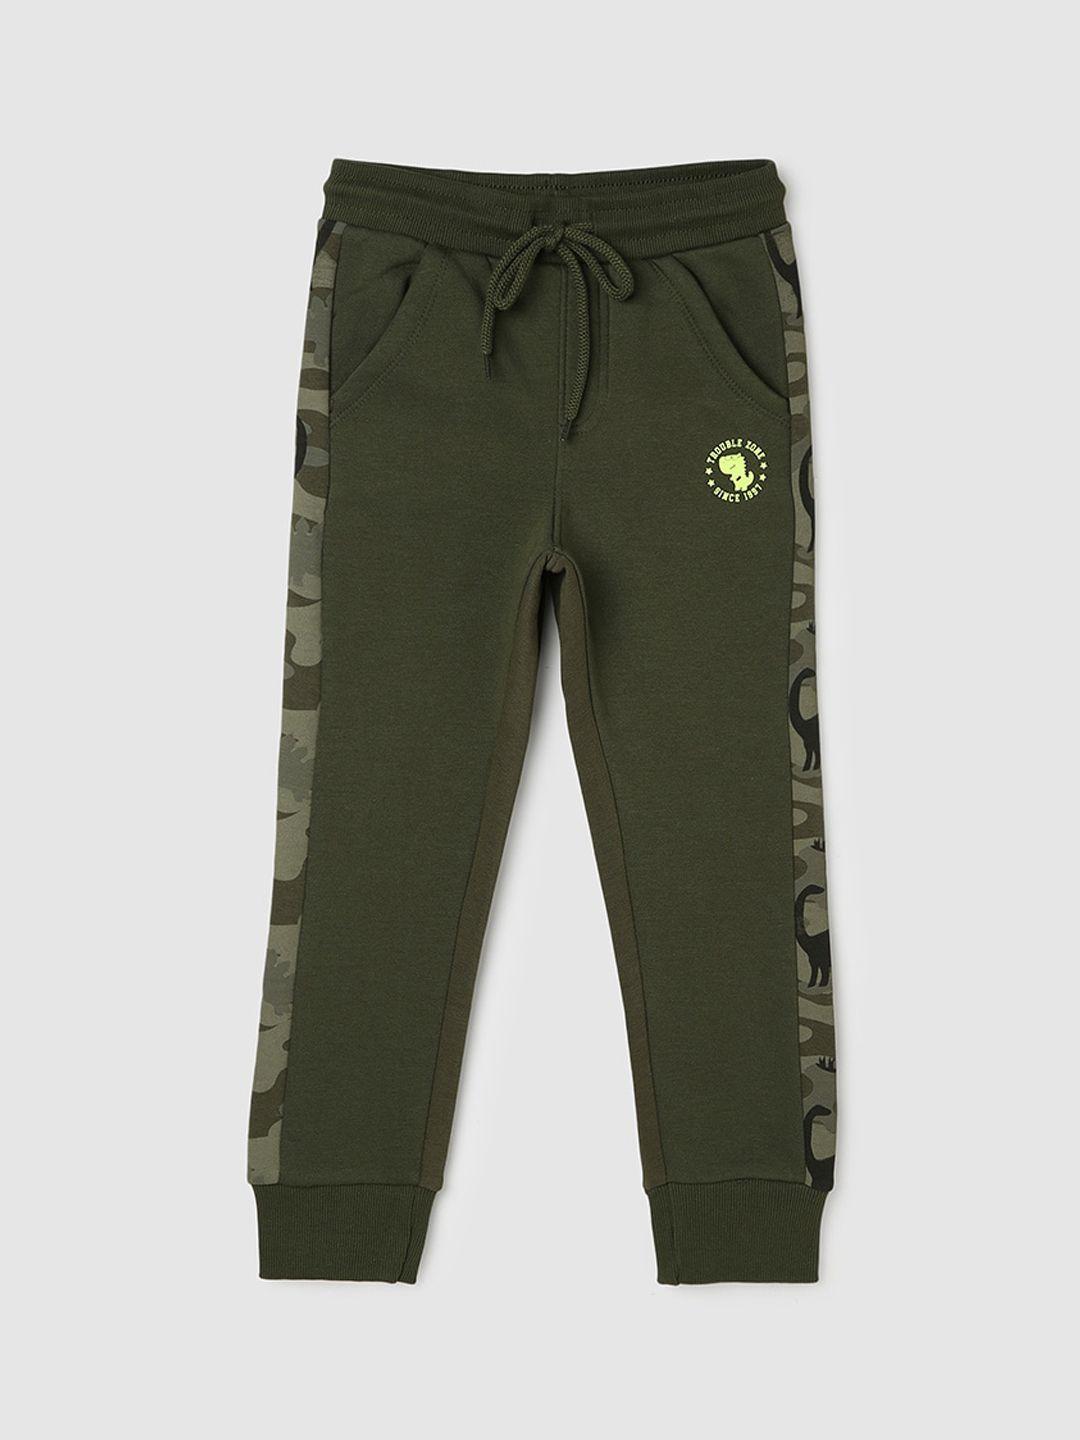 max boys camouflage printed joggers